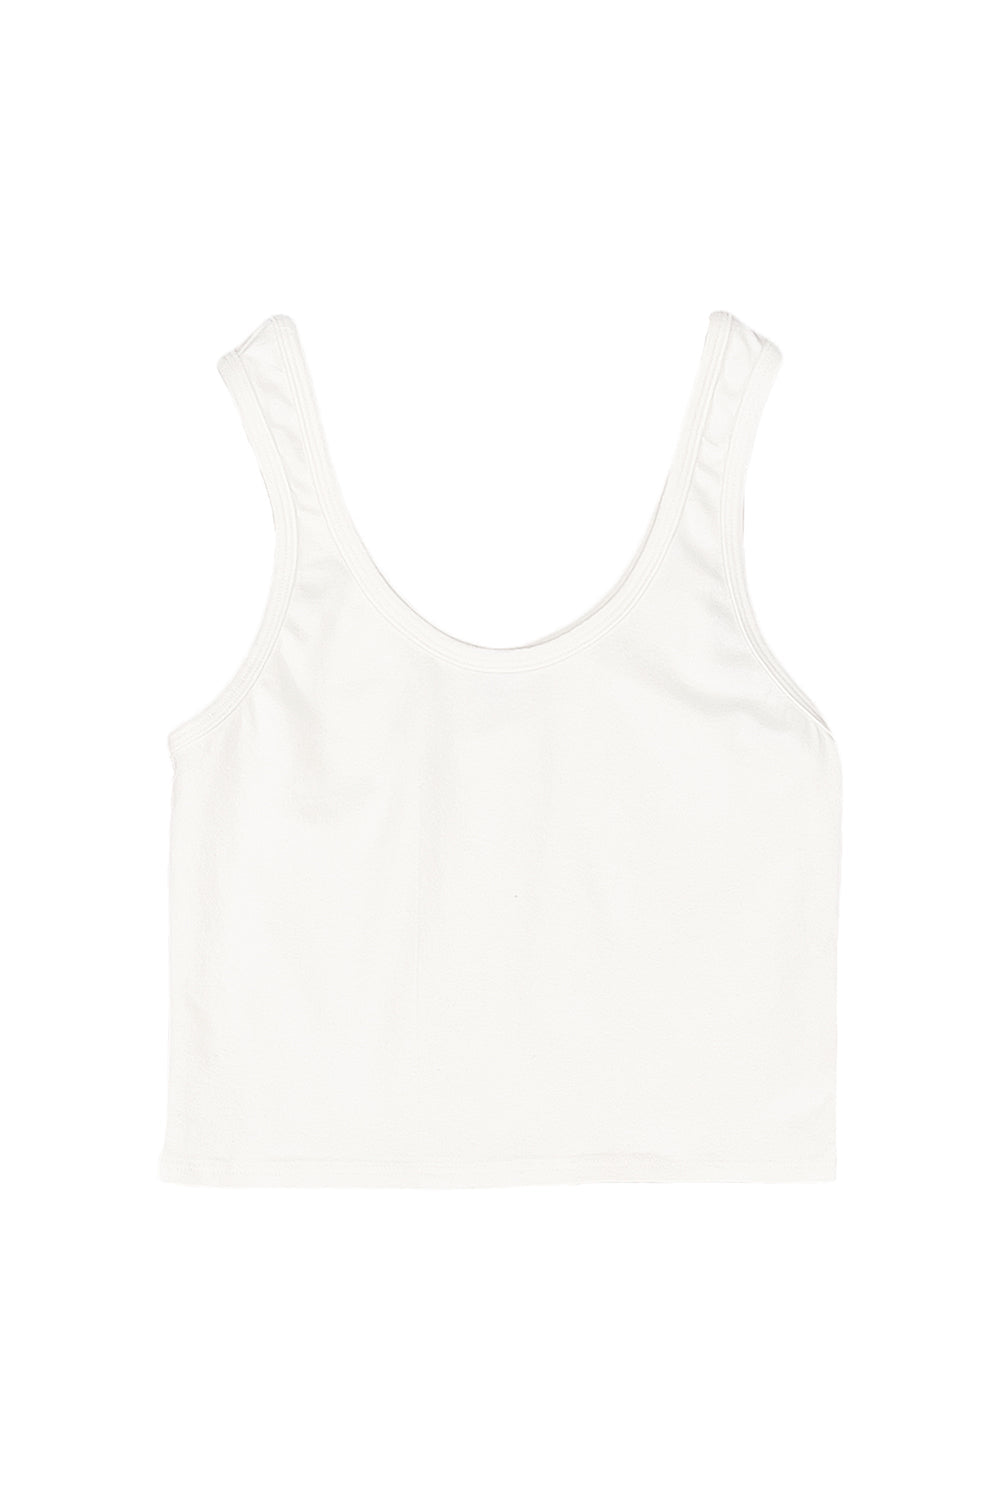 A sporty tank built from a soft and breathable hemp blend with the perfect amount of stretch. Sturdy, but minimal shape is engineered to ensure confident coverage for an active lifestyle. Sustainably made.